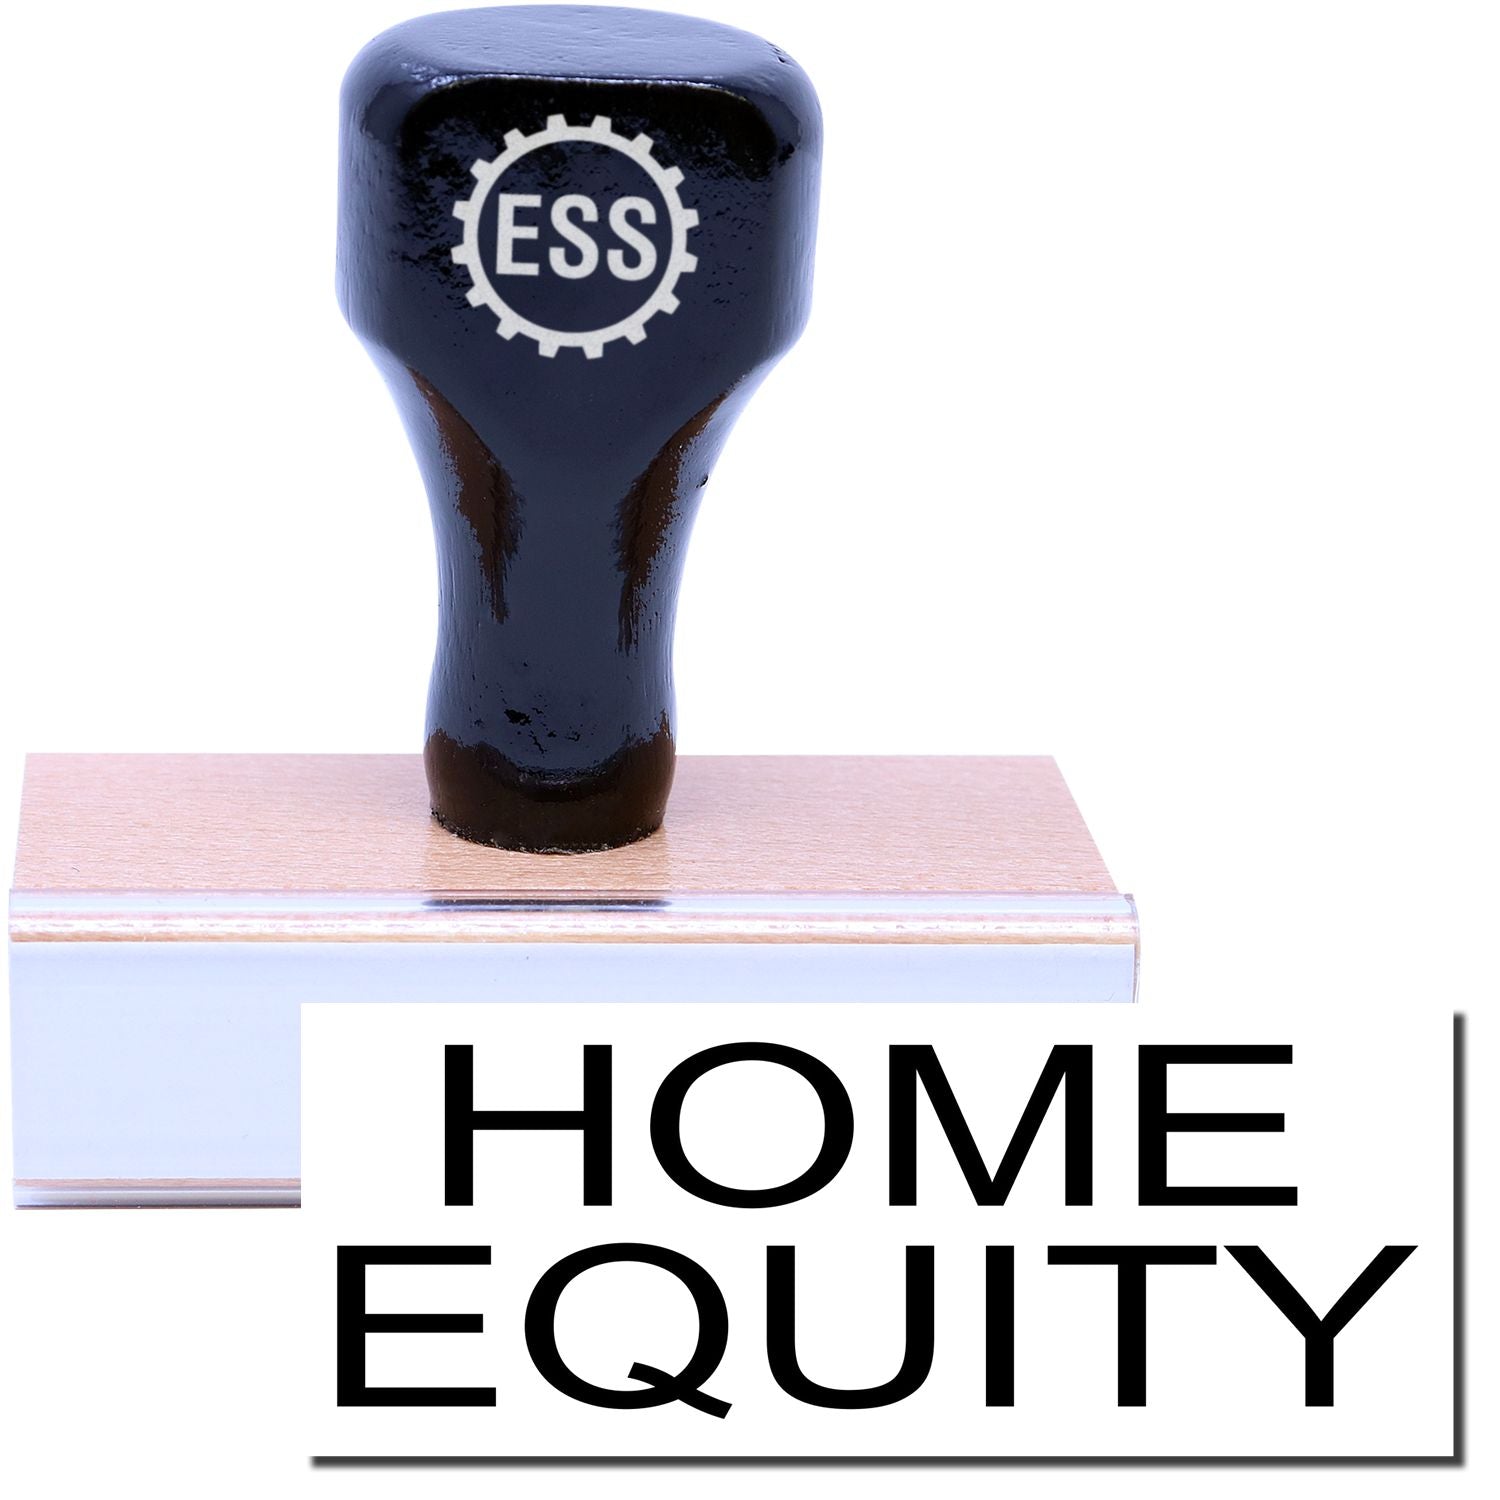 A stock office rubber stamp with a stamped image showing how the text "HOME EQUITY" is displayed after stamping.